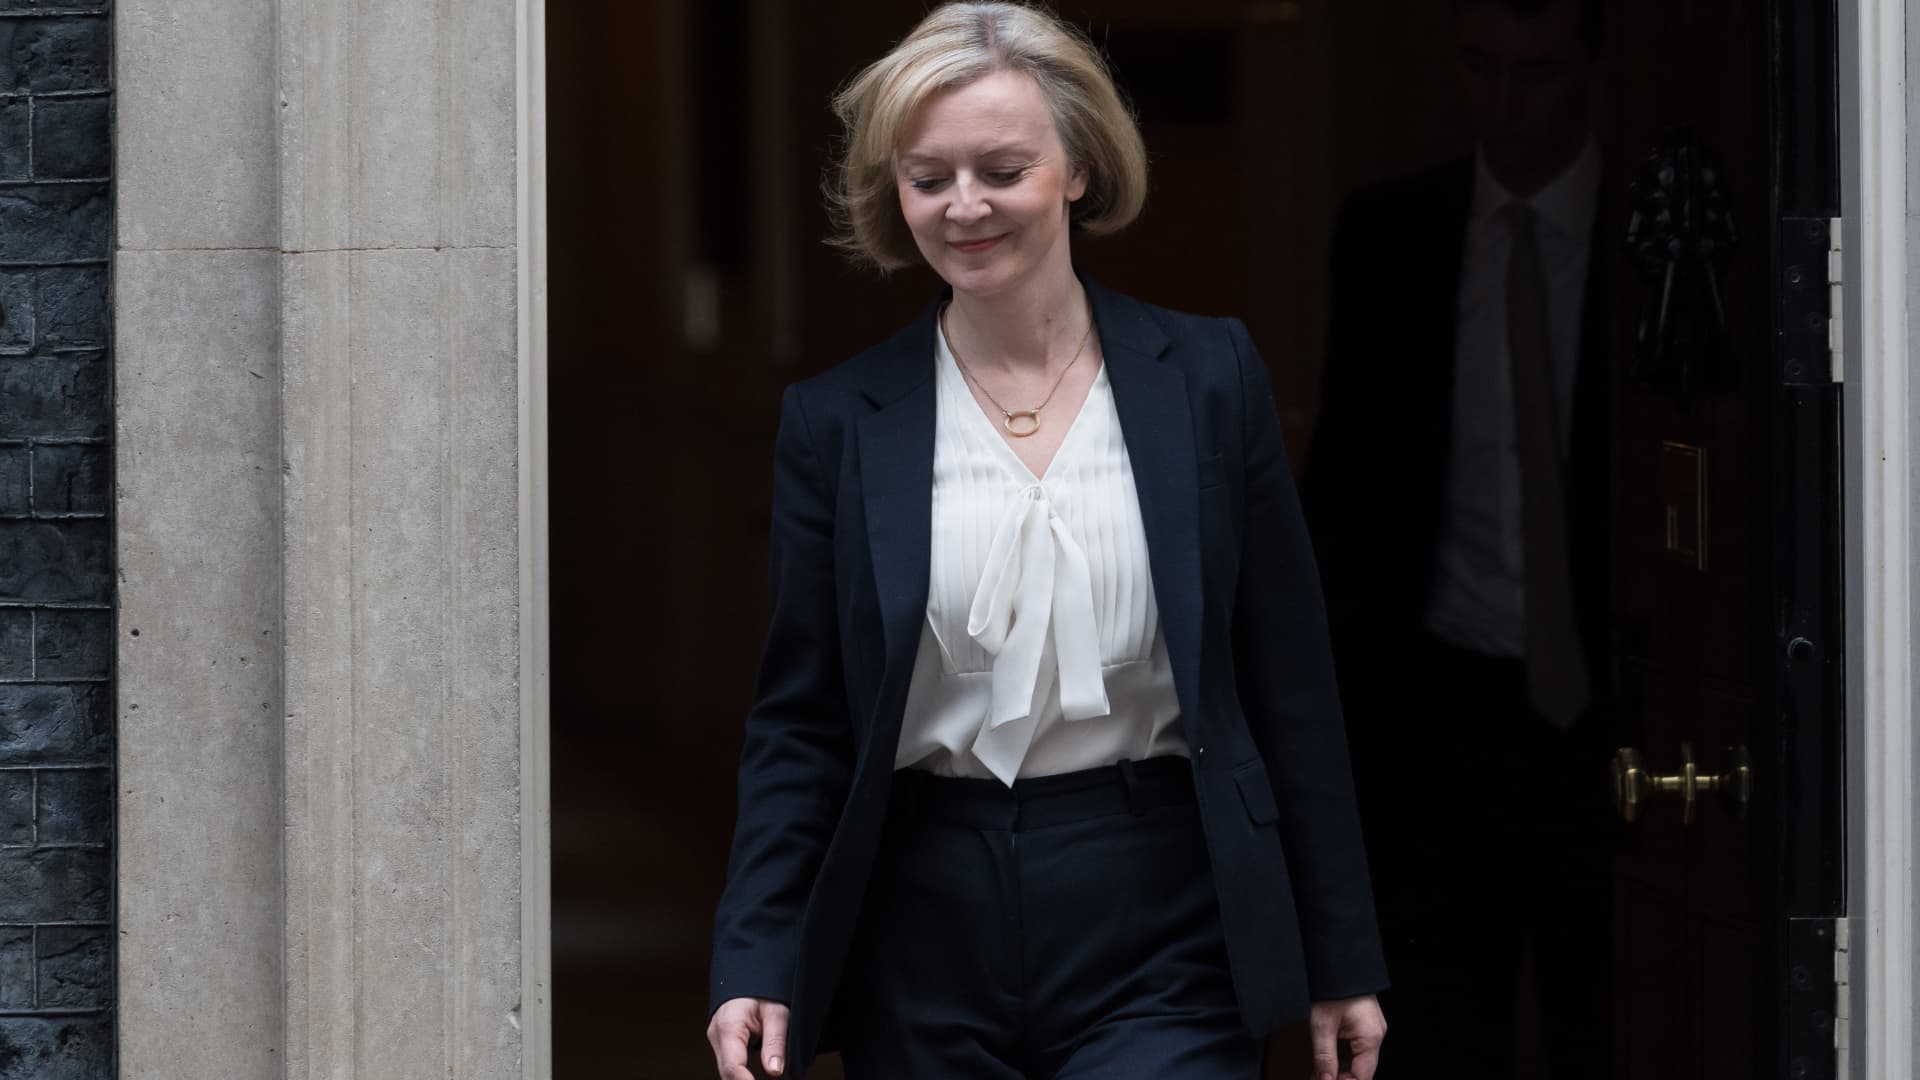 UK PM Liz Truss says she’s a ‘fighter not a quitter’ as lawmakers plot to oust her – CNBC